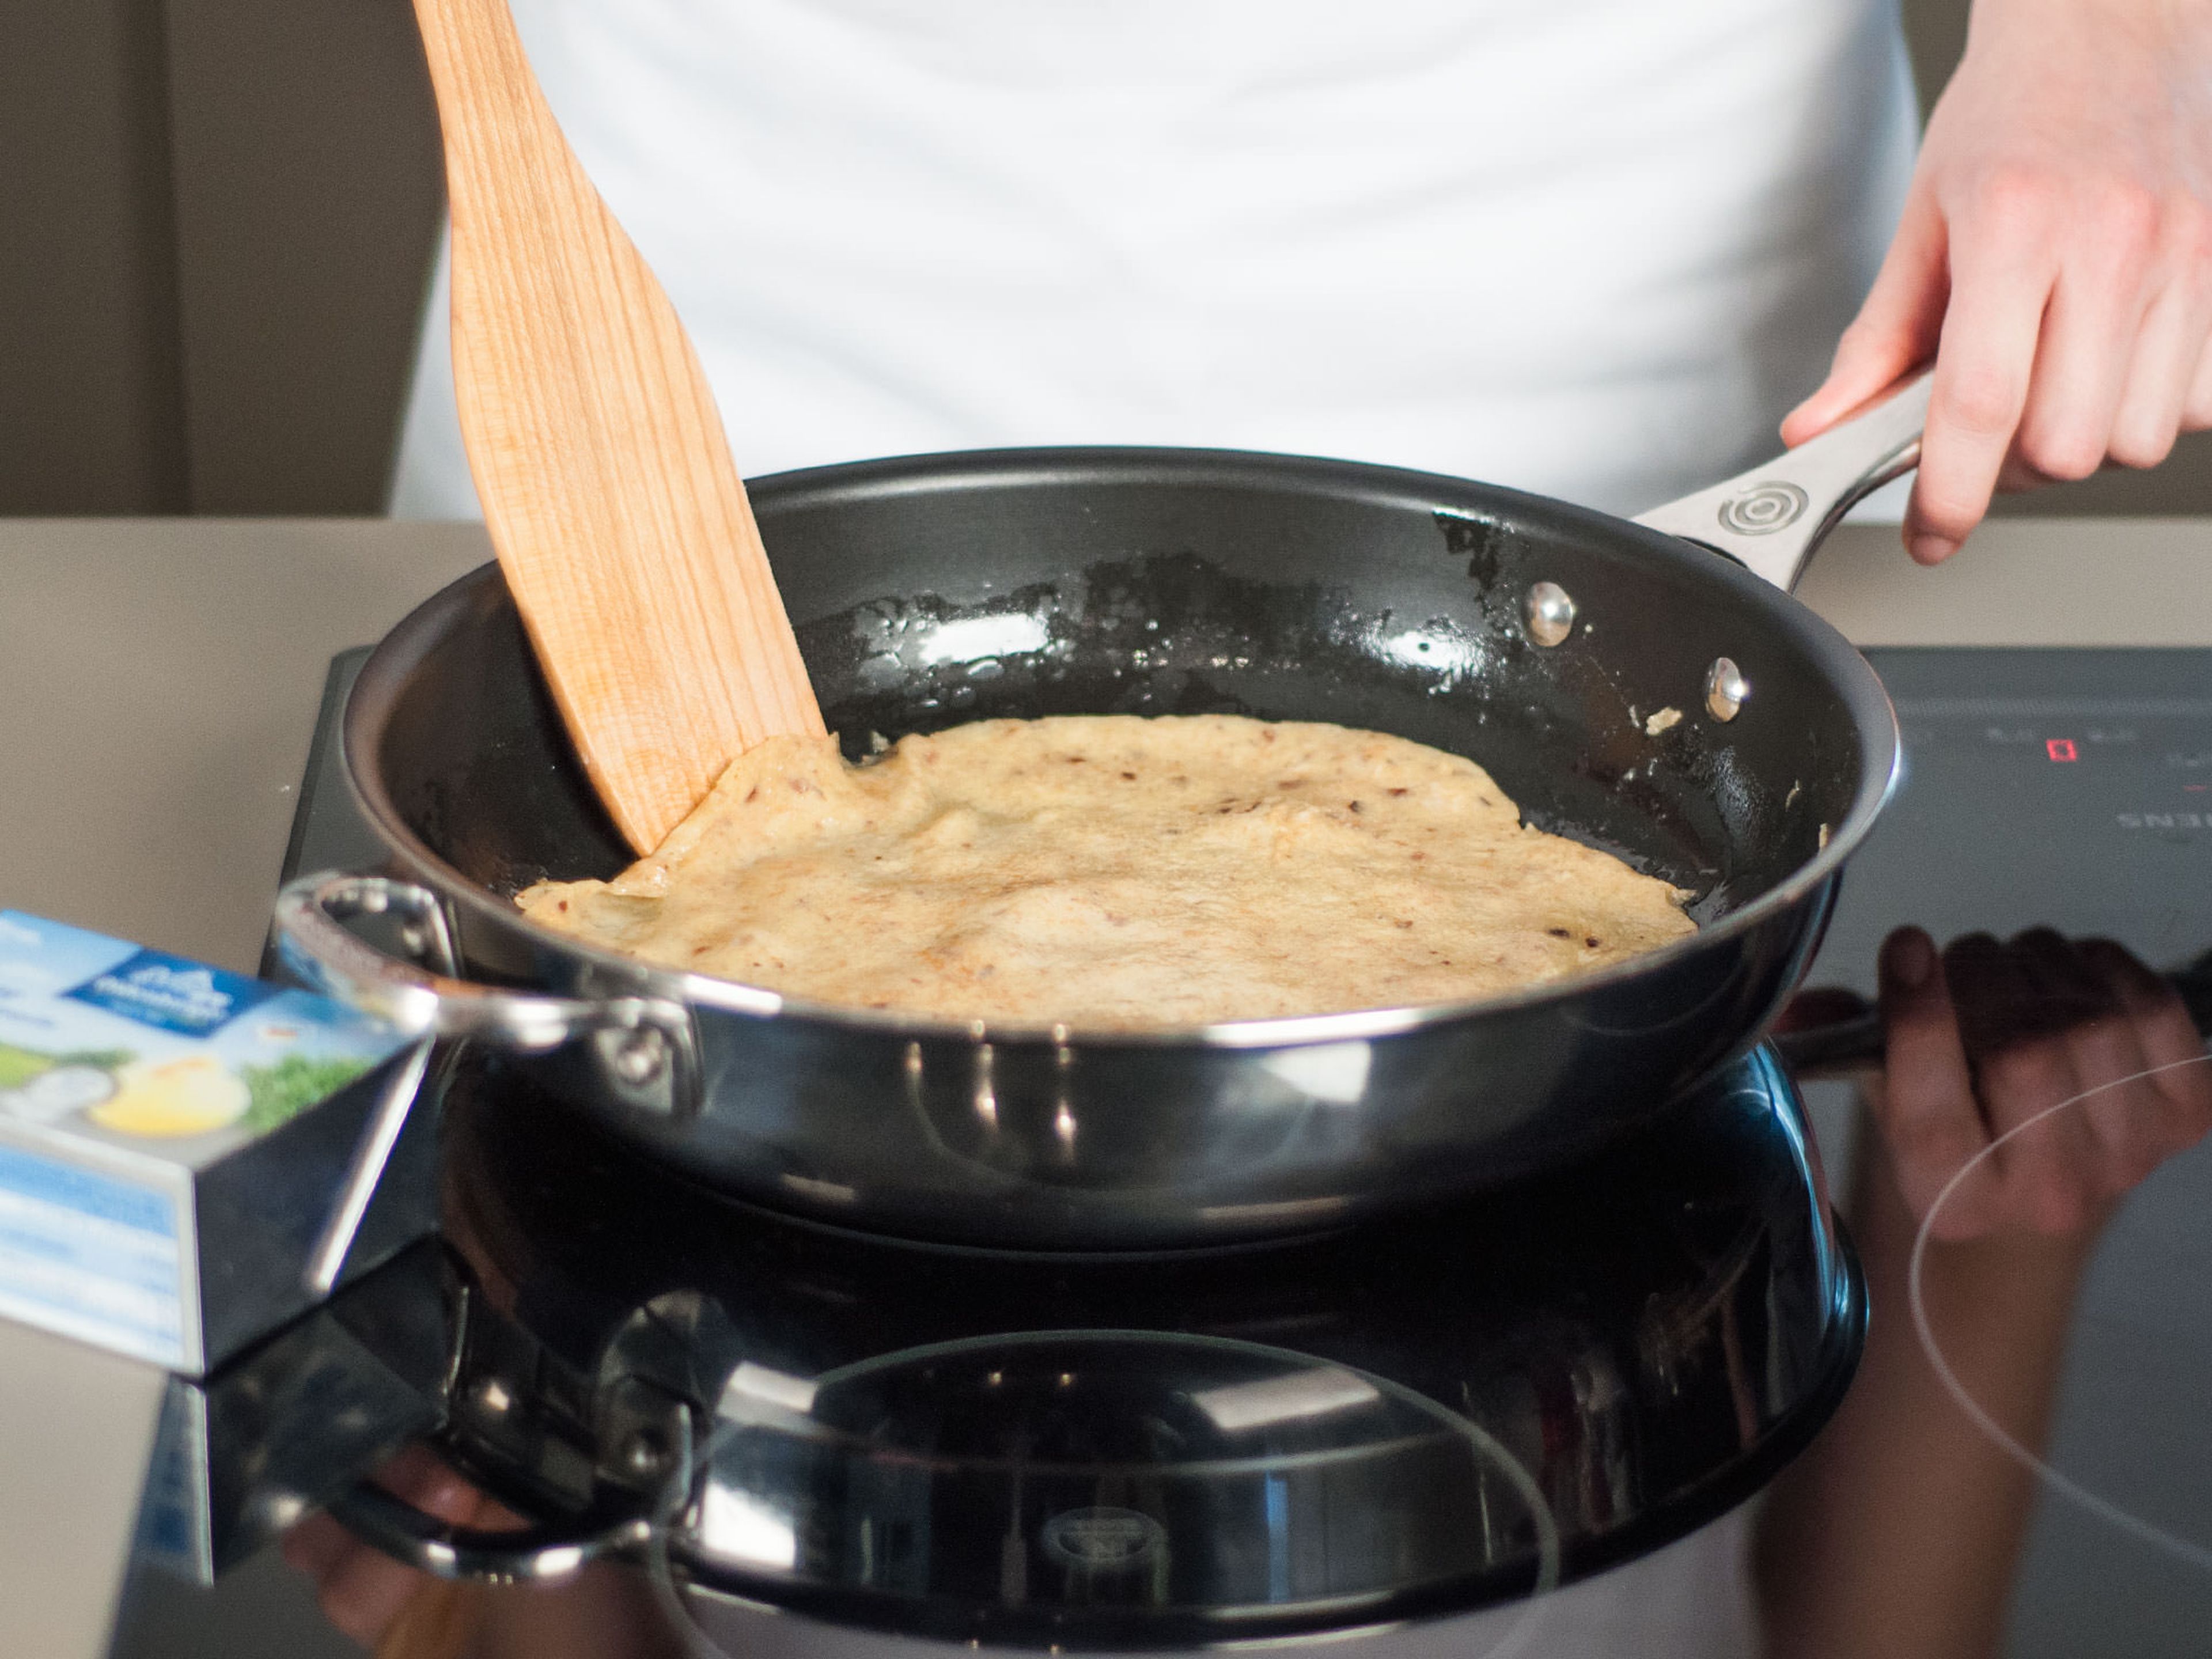 Warm up a frying pan (approx. 25 cm) over medium heat and melt a small knob of butter. Then, add a thin layer of batter and spread to the edges. Cook for approx. 2 – 3 min. until the batter has set, then flip and cook for another 1 – 2 min.